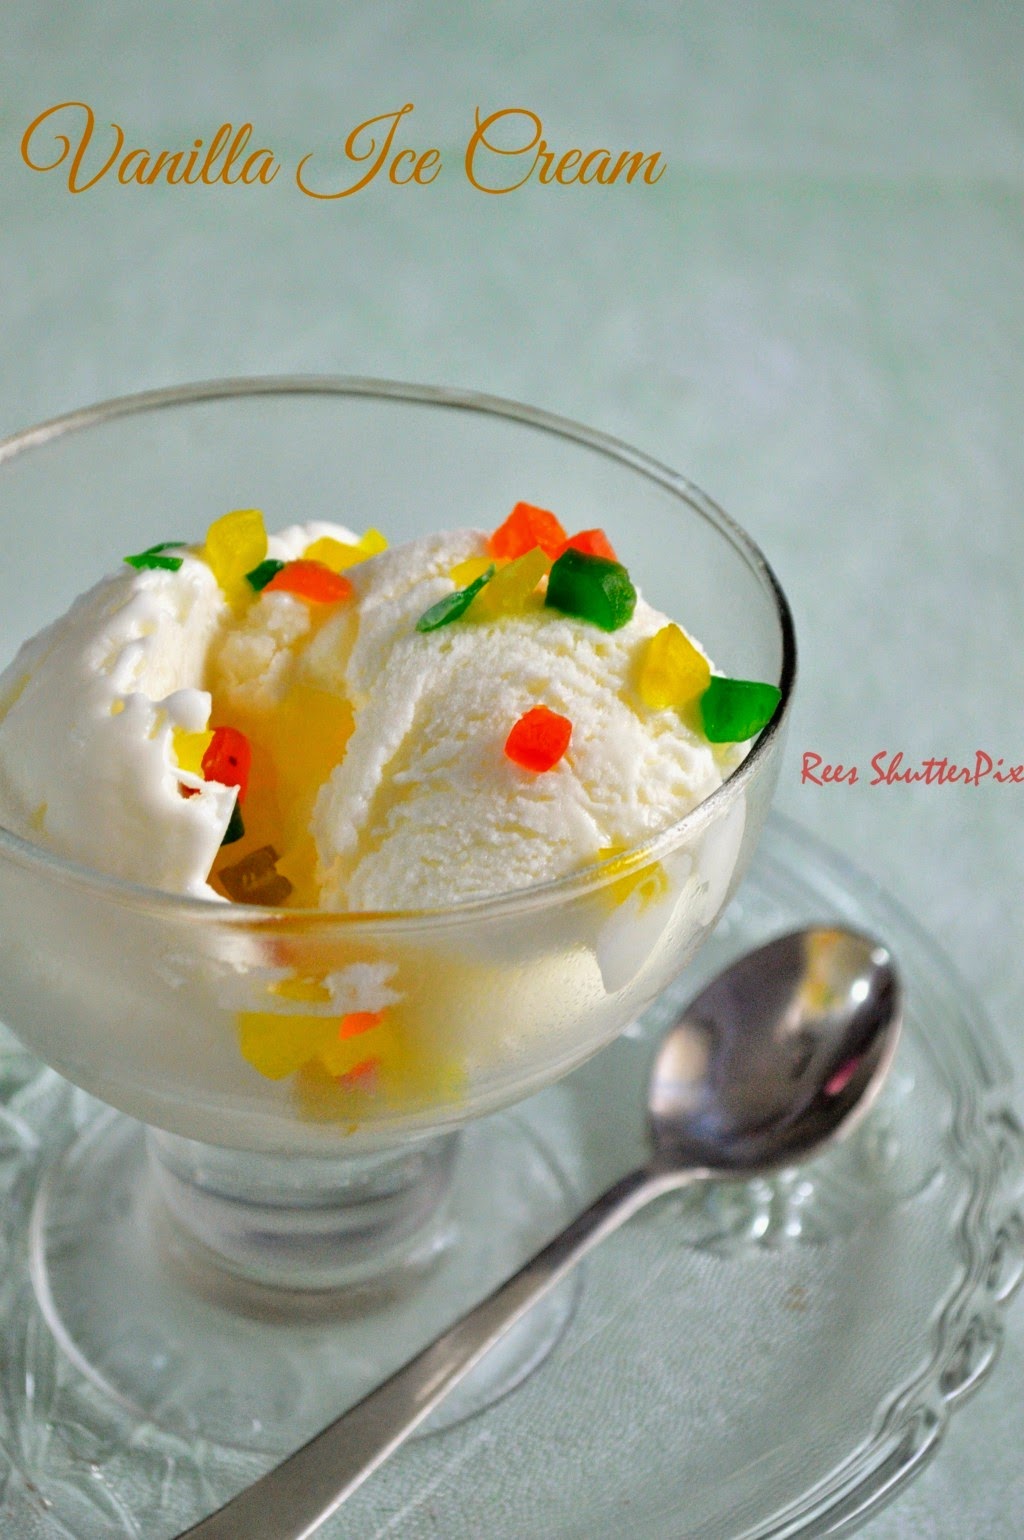  easy ice cream to make at home, step by step pictures for vanilla ice cream, milk ice cream, homemade ice cream